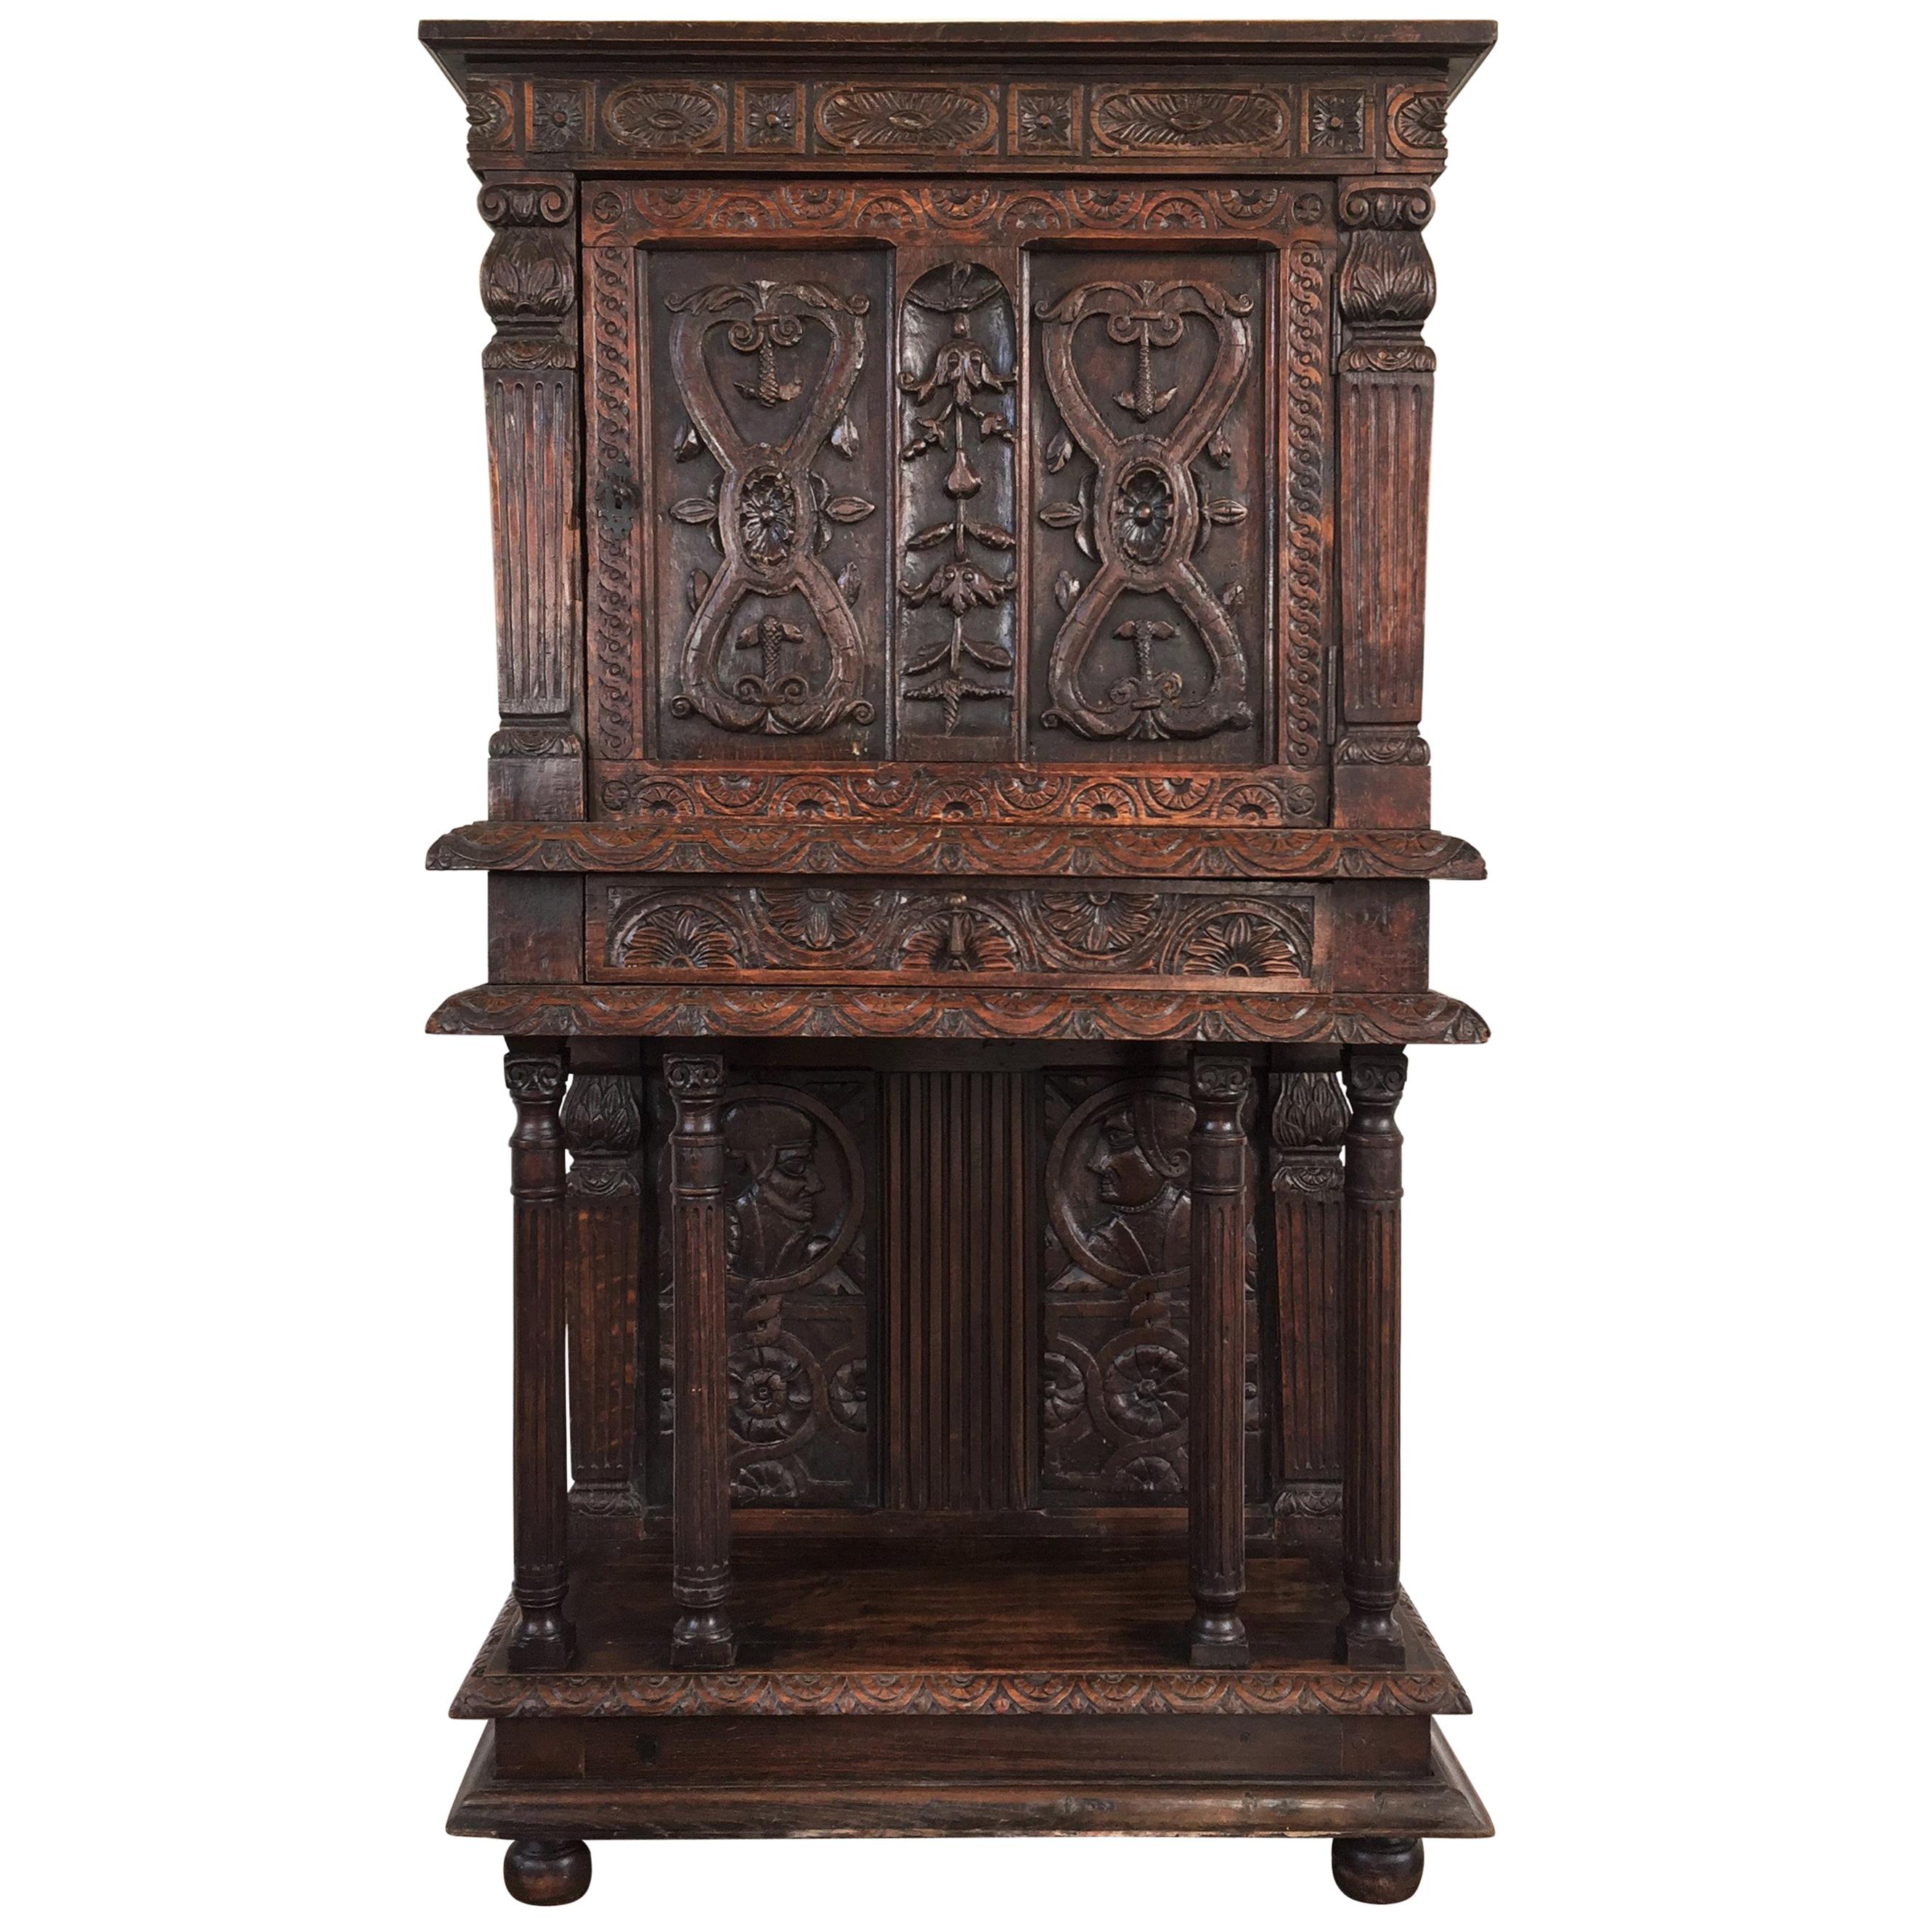 Renaissance Cabinet in Richly Carved Oak, circa 1600